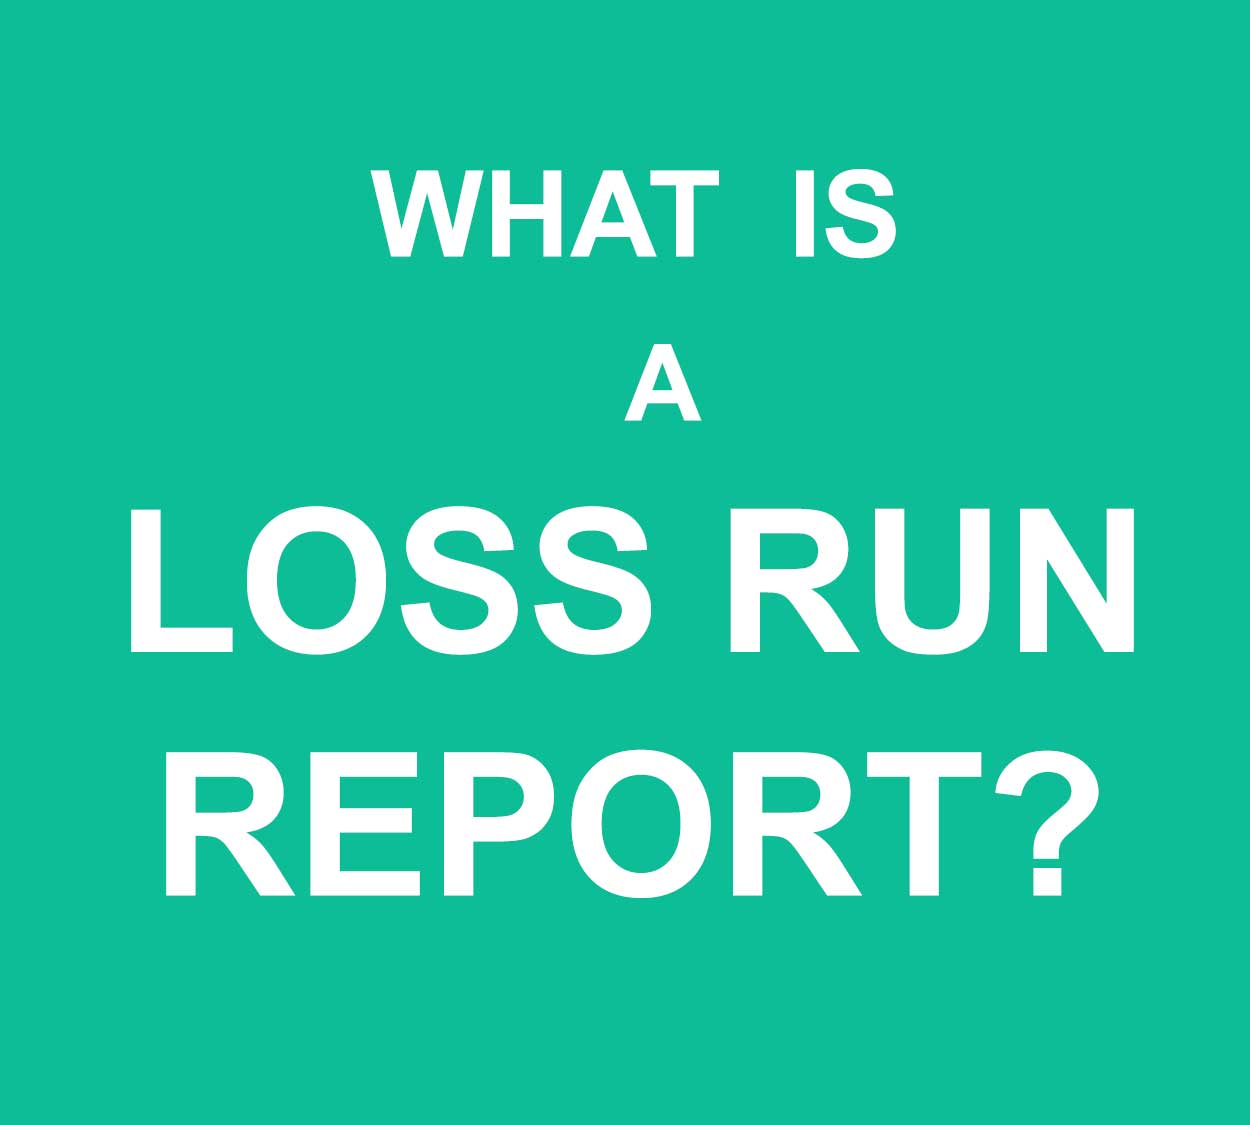 What is A Medical Malpractice Insurance Loss Run Report